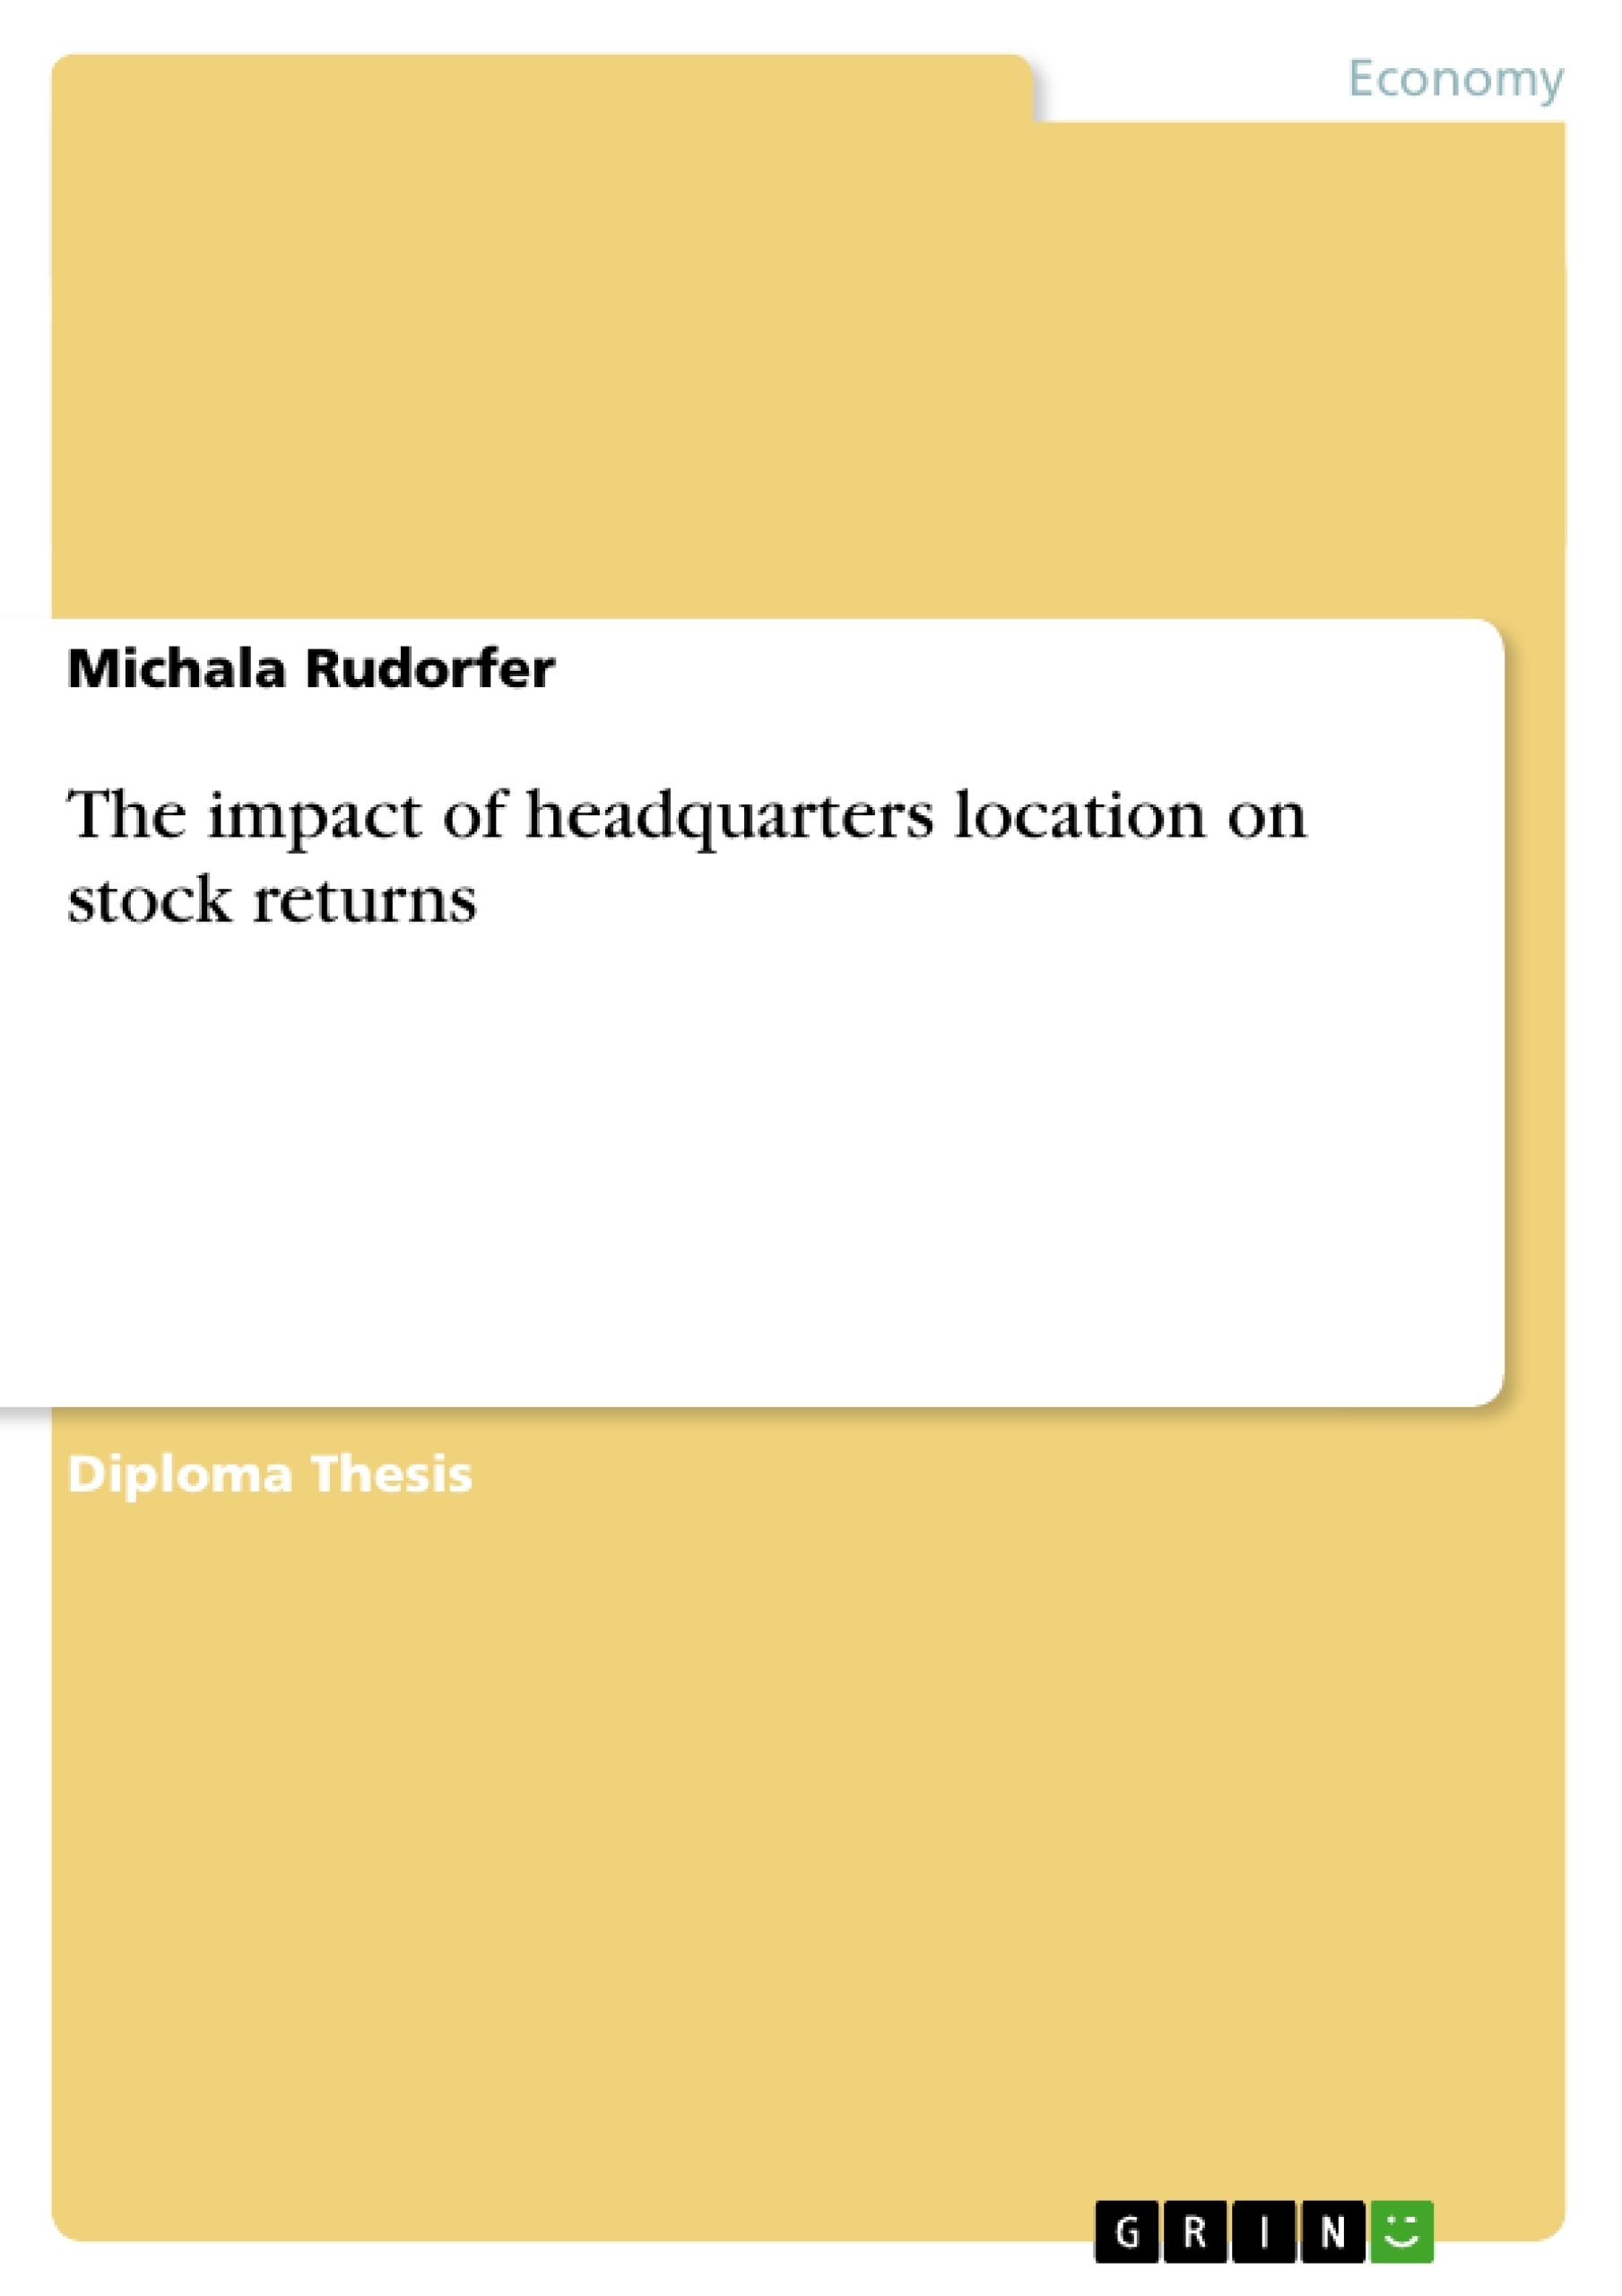 Title: The impact of headquarters location on stock returns